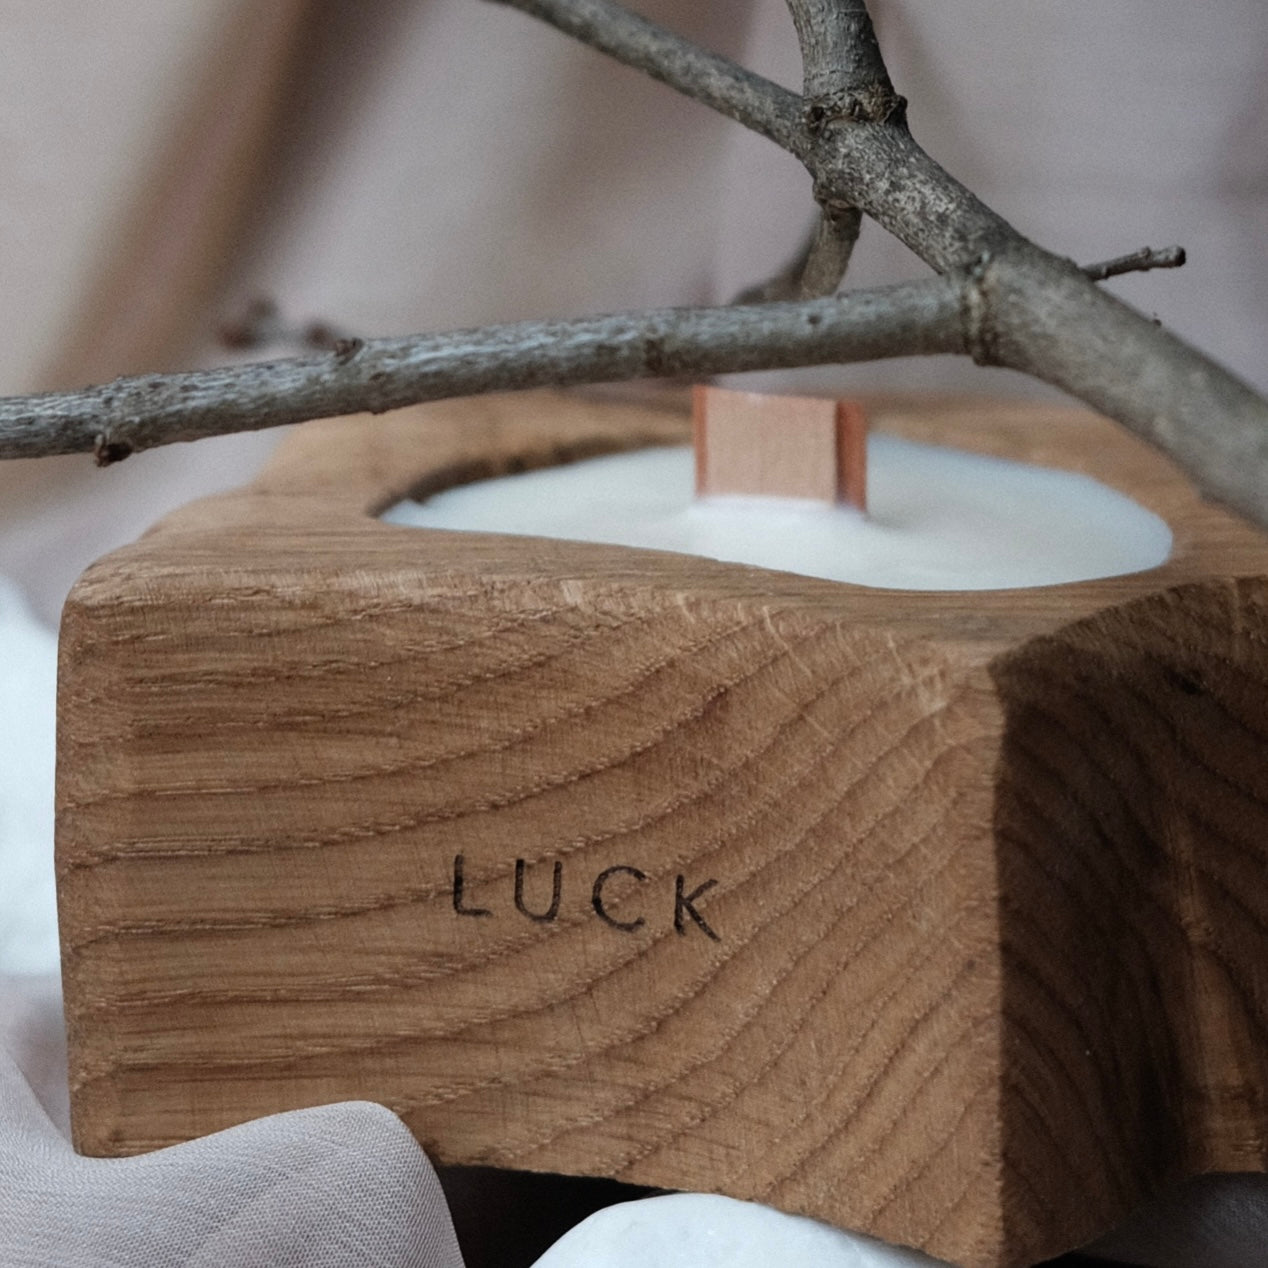 Exclusive aromatic candle in a wooden oak candlestick and a crackling wooden wick - LUCK.